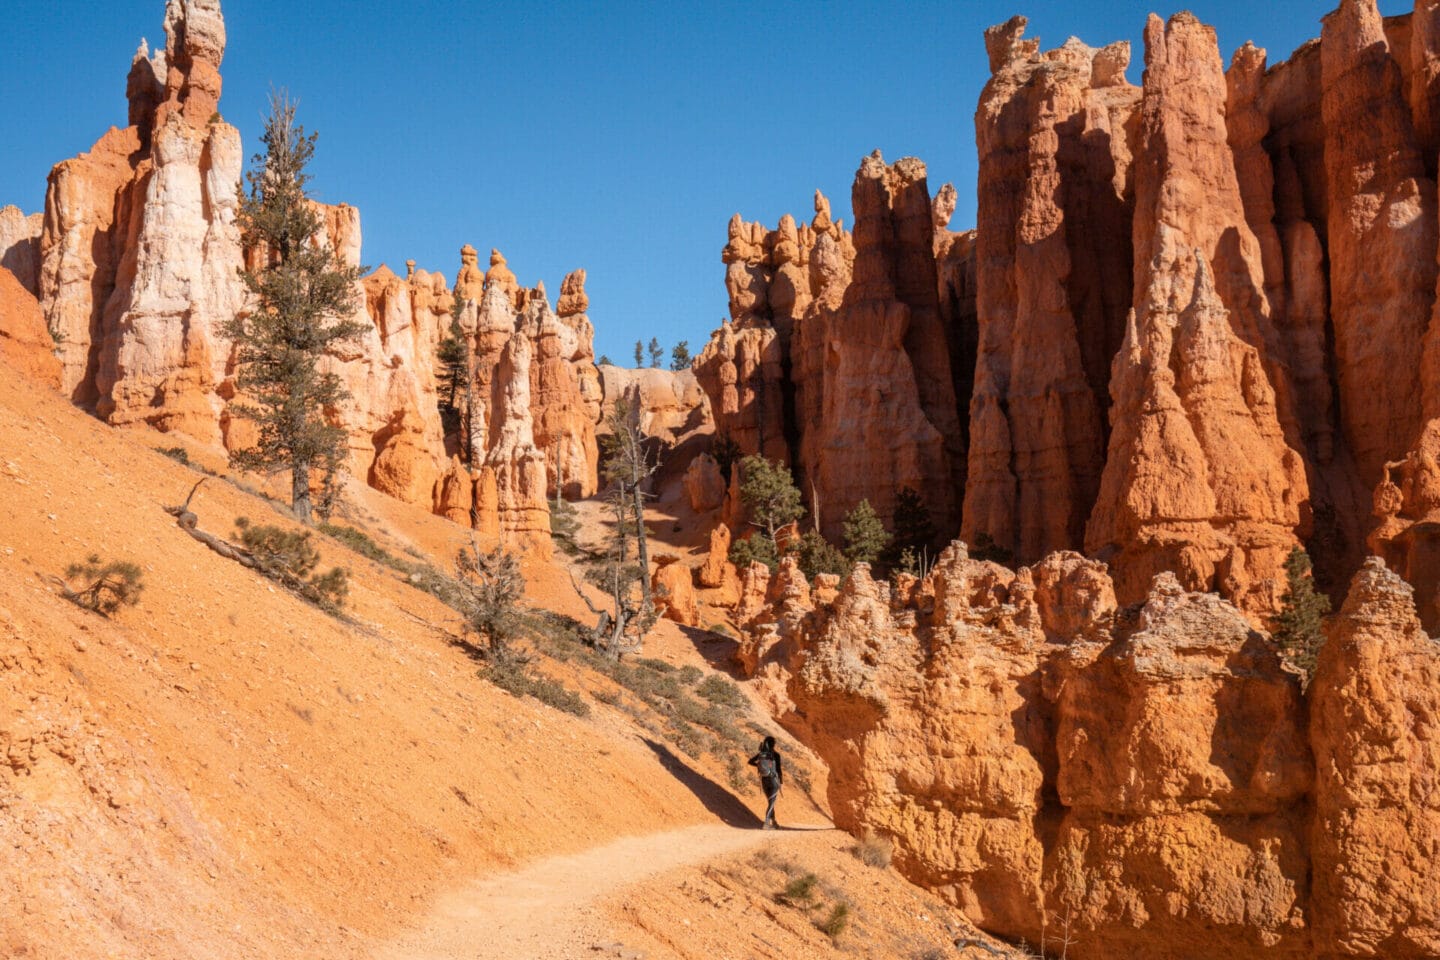 Hiking the Navajo Loop and Queen's Garden Trail in Bryce Canyon